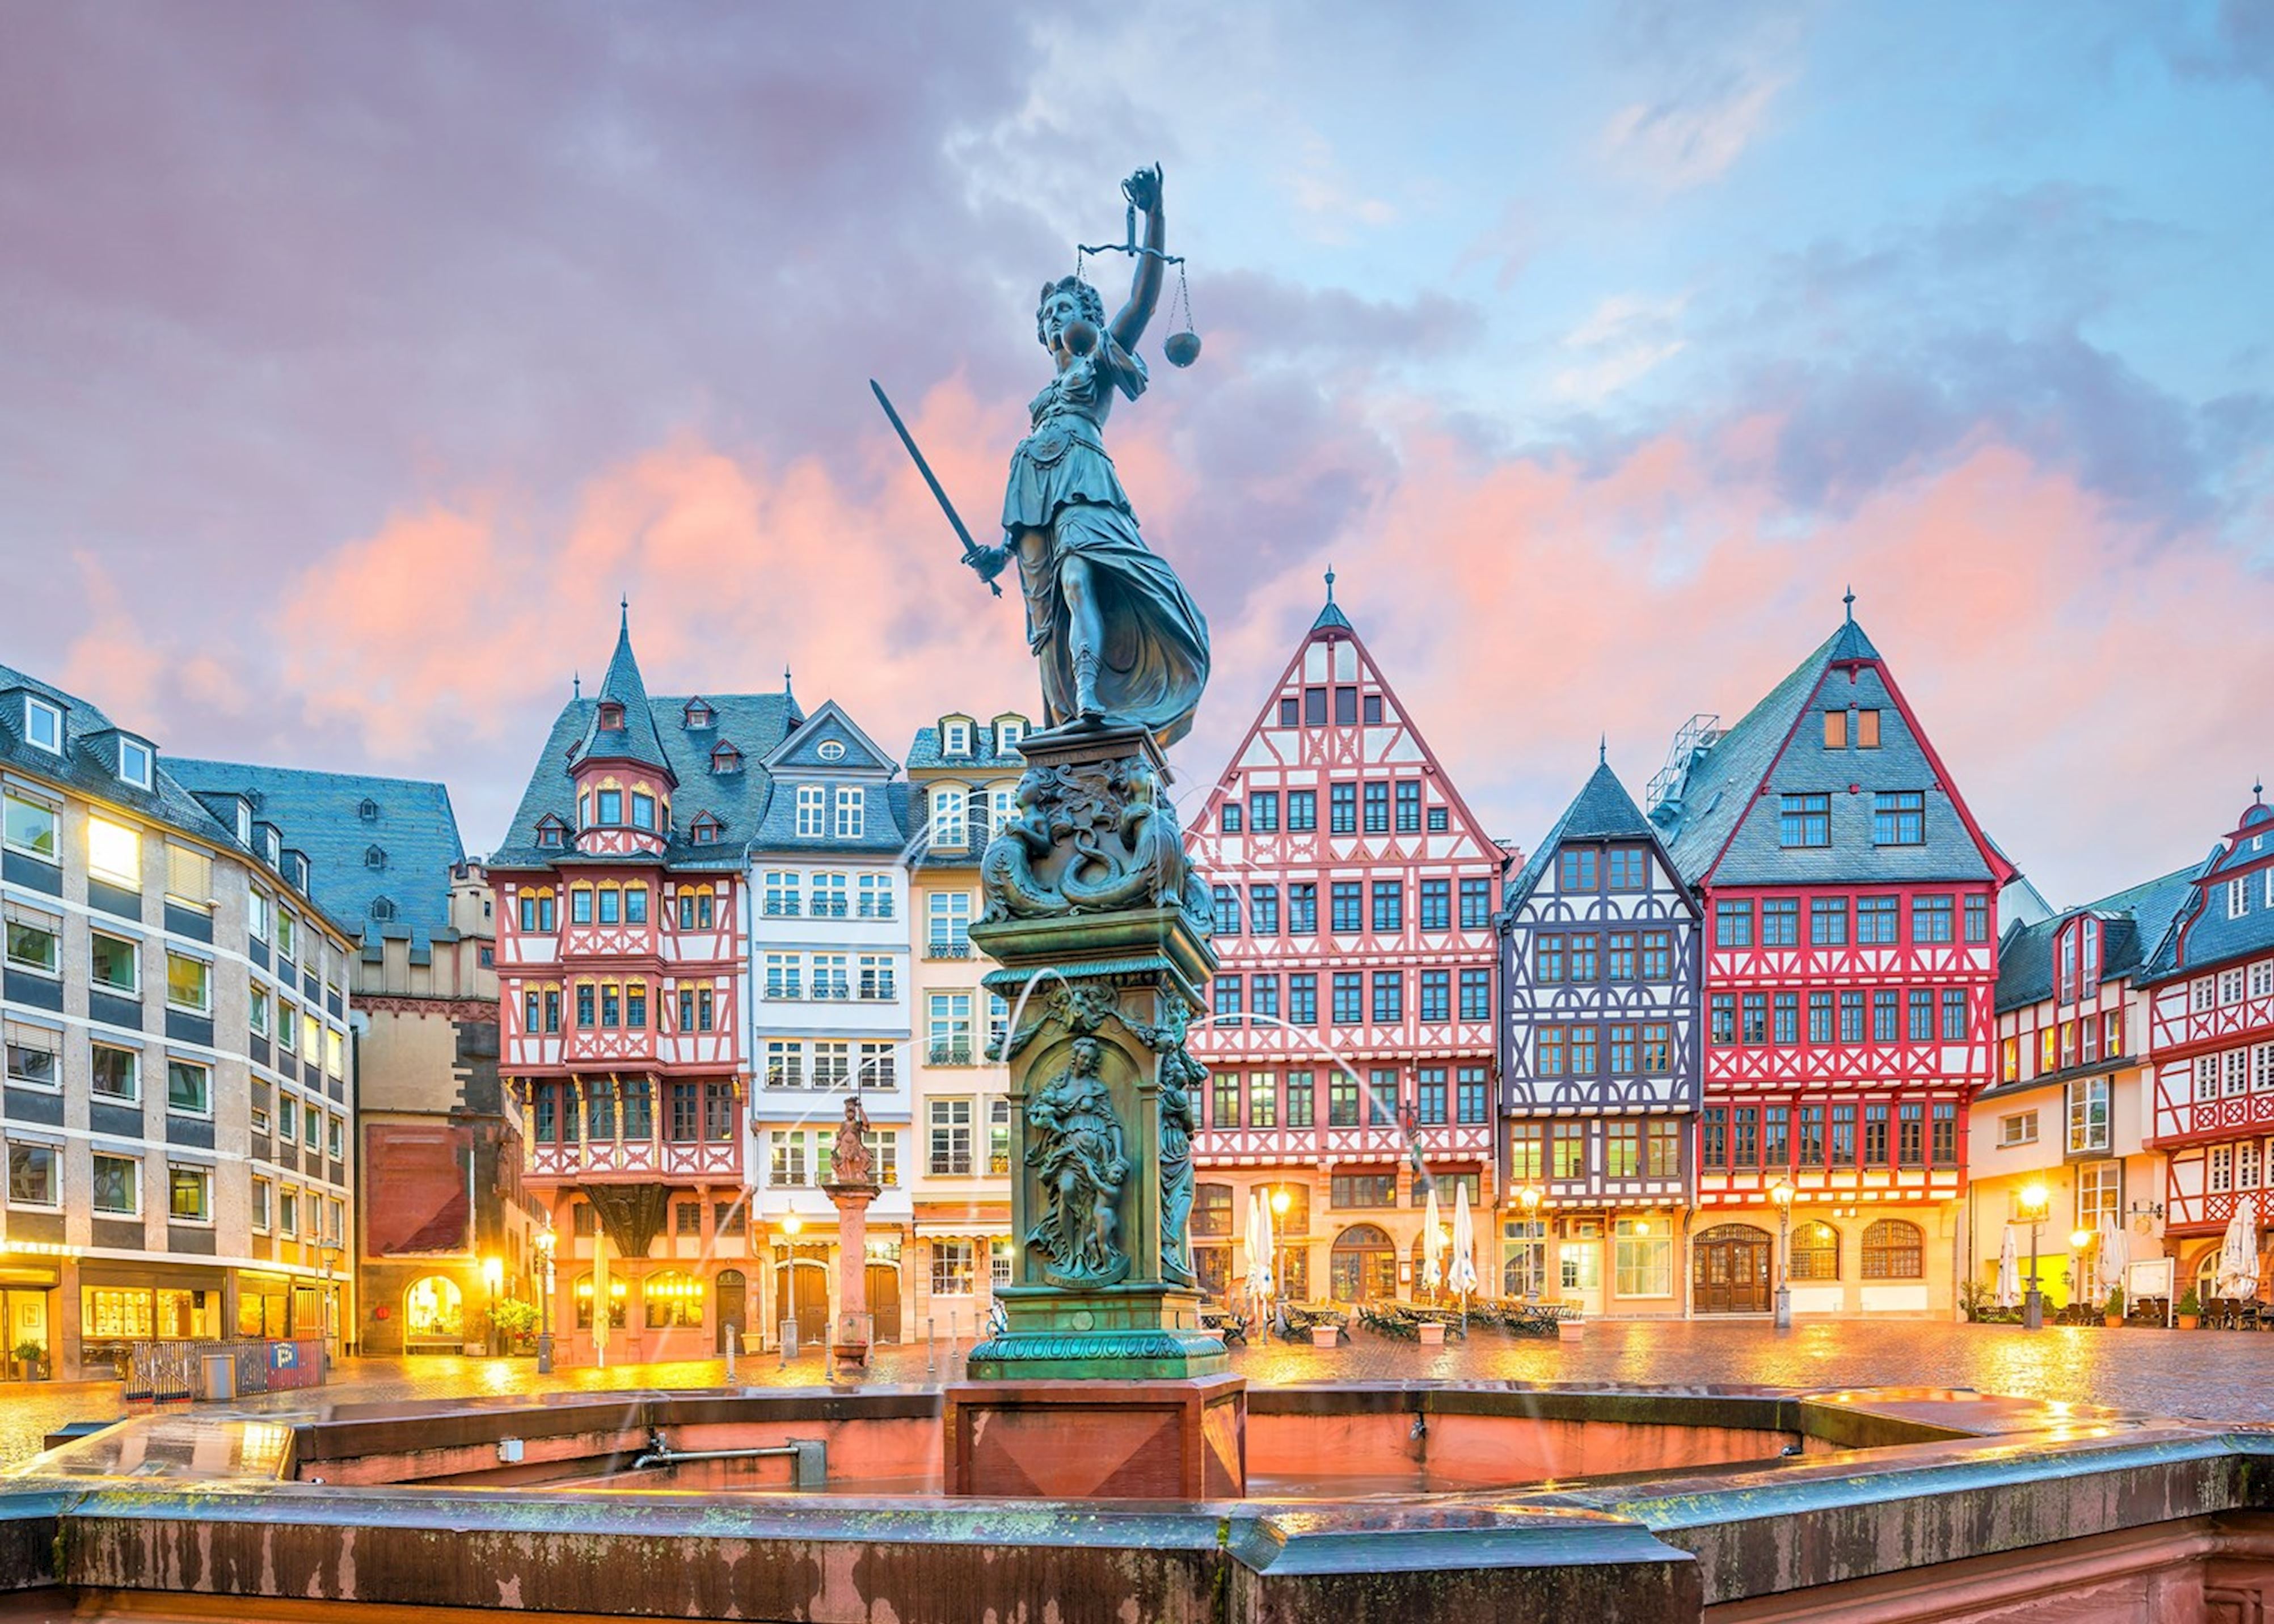 Visit Frankfurt on a trip to Germany | Audley Travel